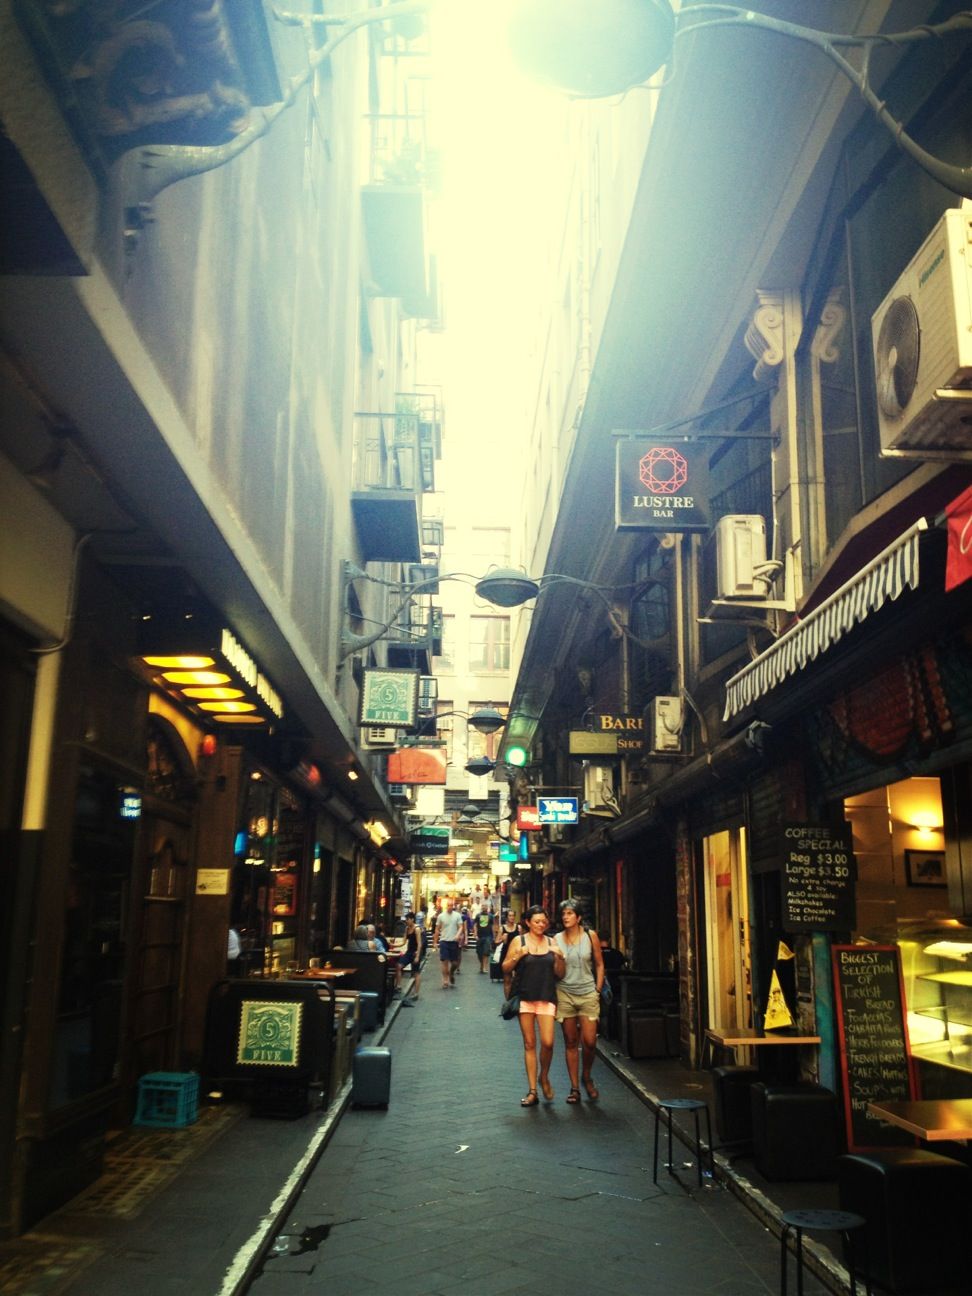 Laneway, where i was waiting for you.